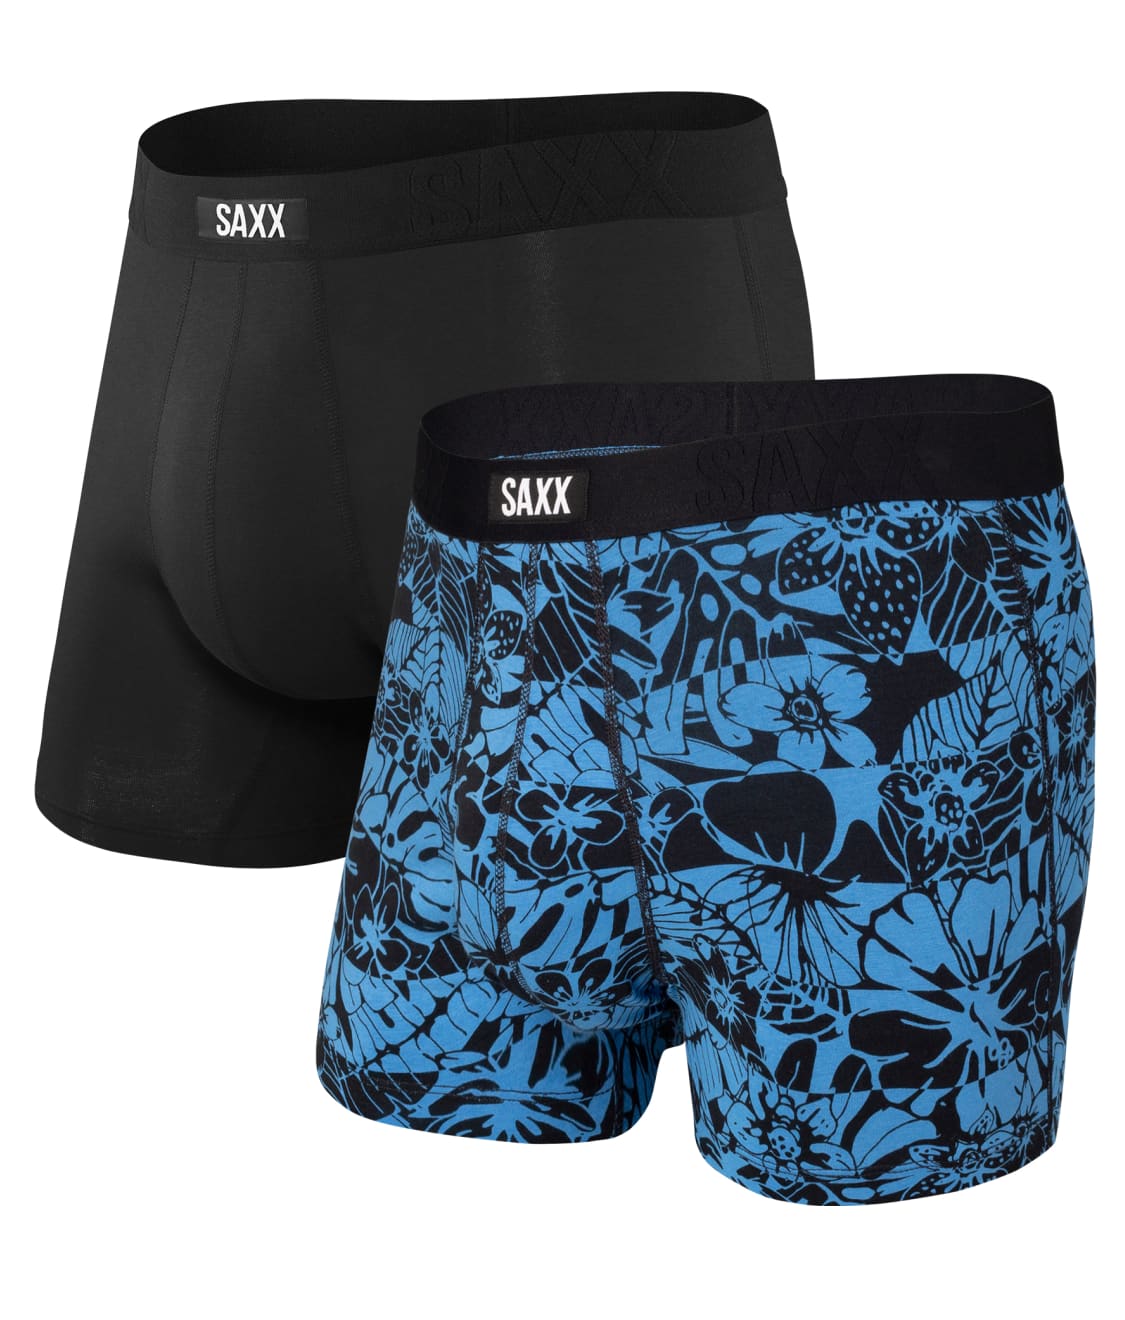 SAXX Undercover Modal Boxer Brief 2-Pack & Reviews | Bare Necessities ...